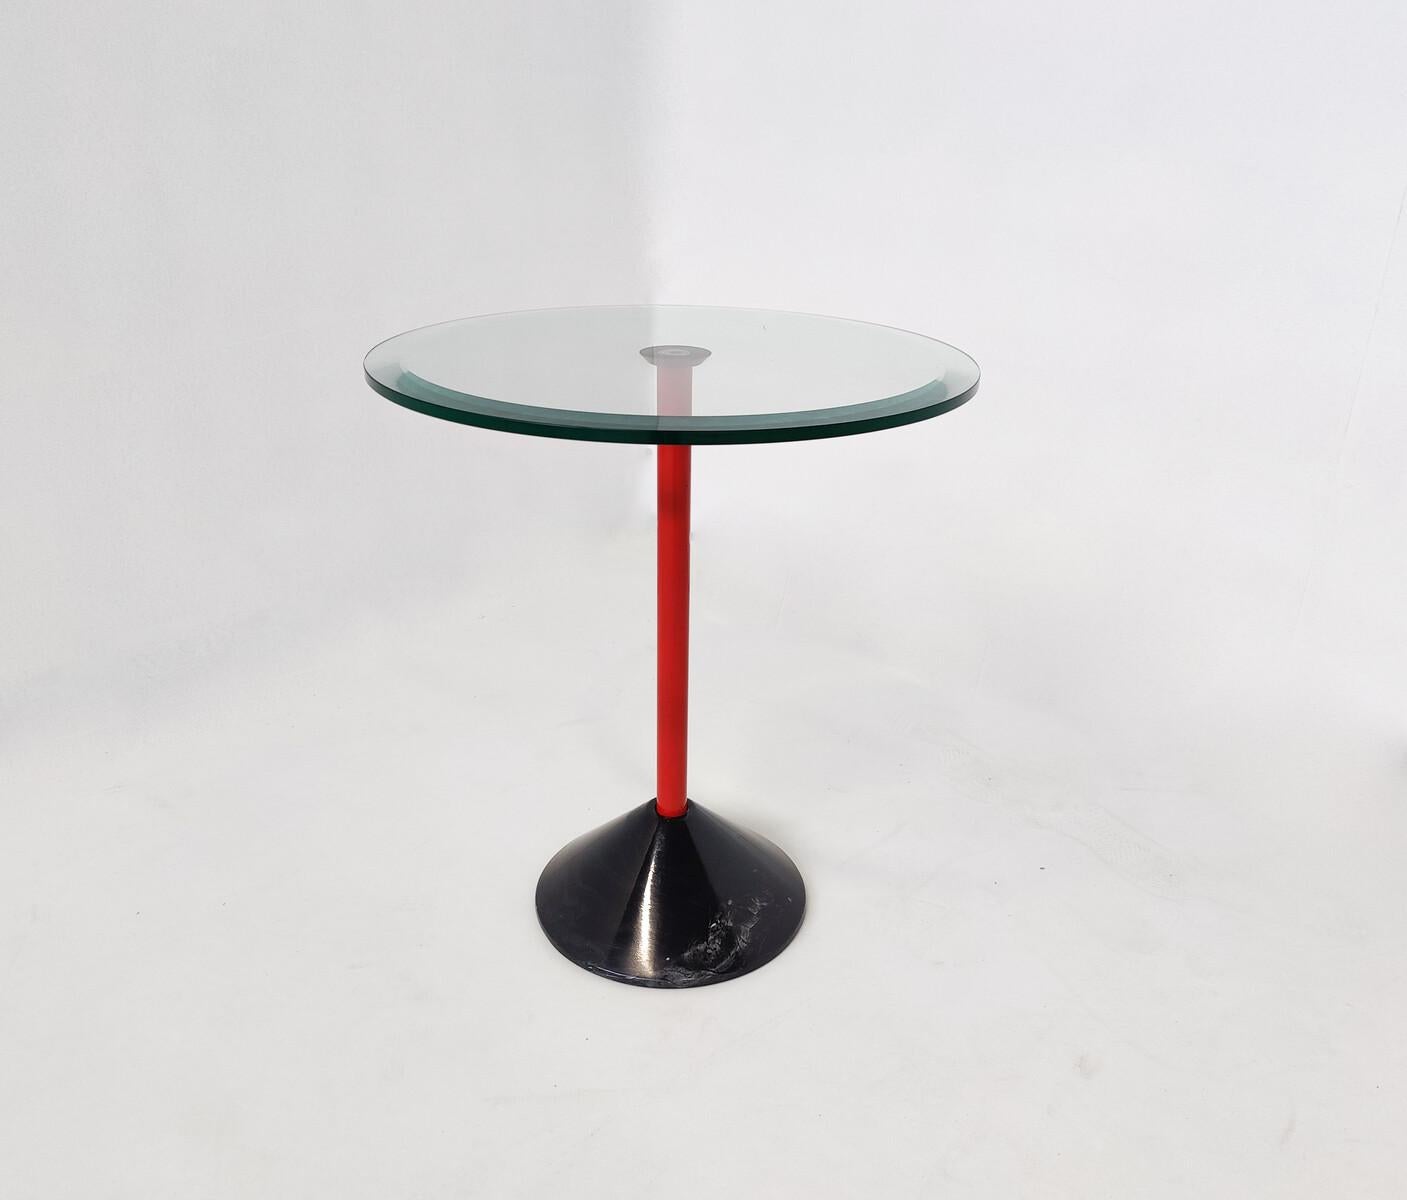 Mid-20th Century Mid-Century Modern Italian Side Table, Metal Glass and Marble, 1950s For Sale